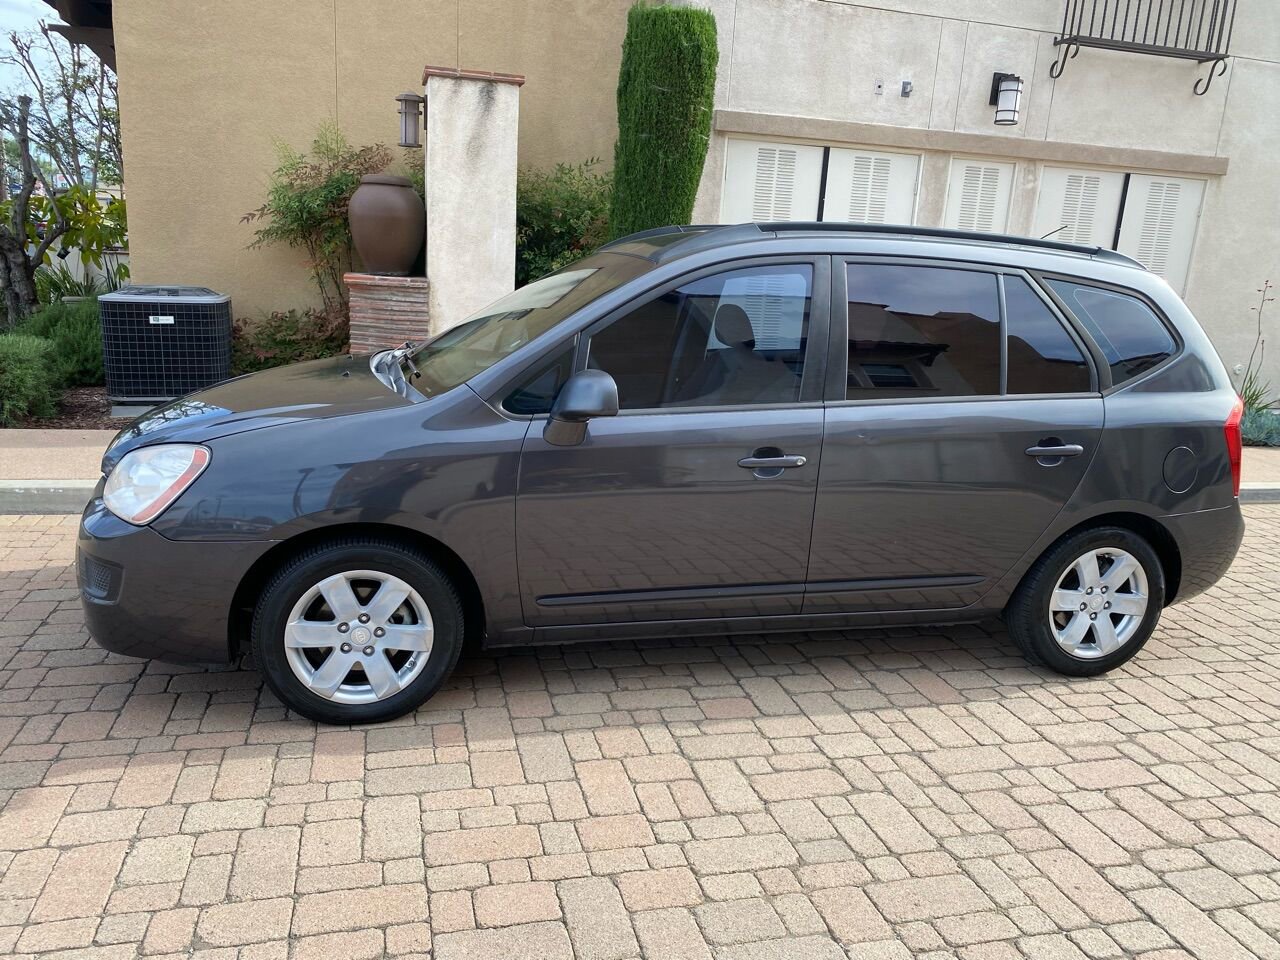 Used 2008 Kia Rondo for Sale Right Now - Autotrader